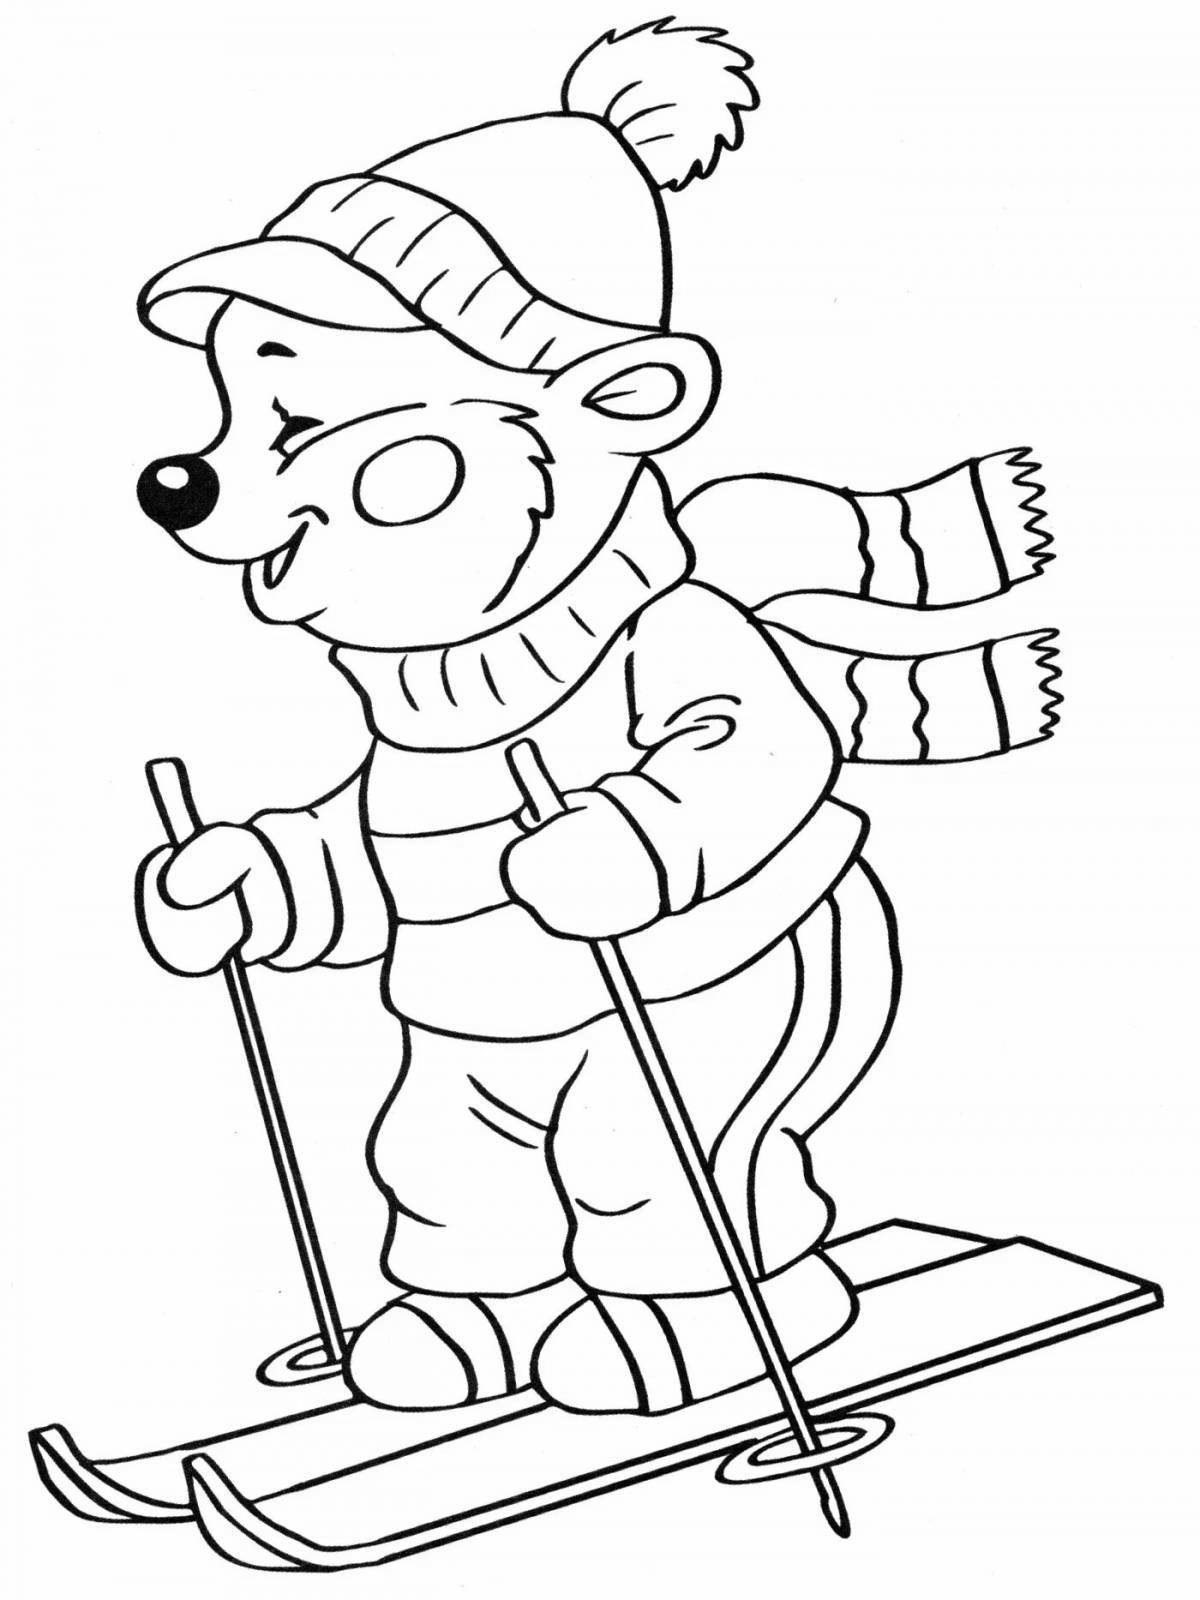 Great winter sports coloring book for 4-5 year olds